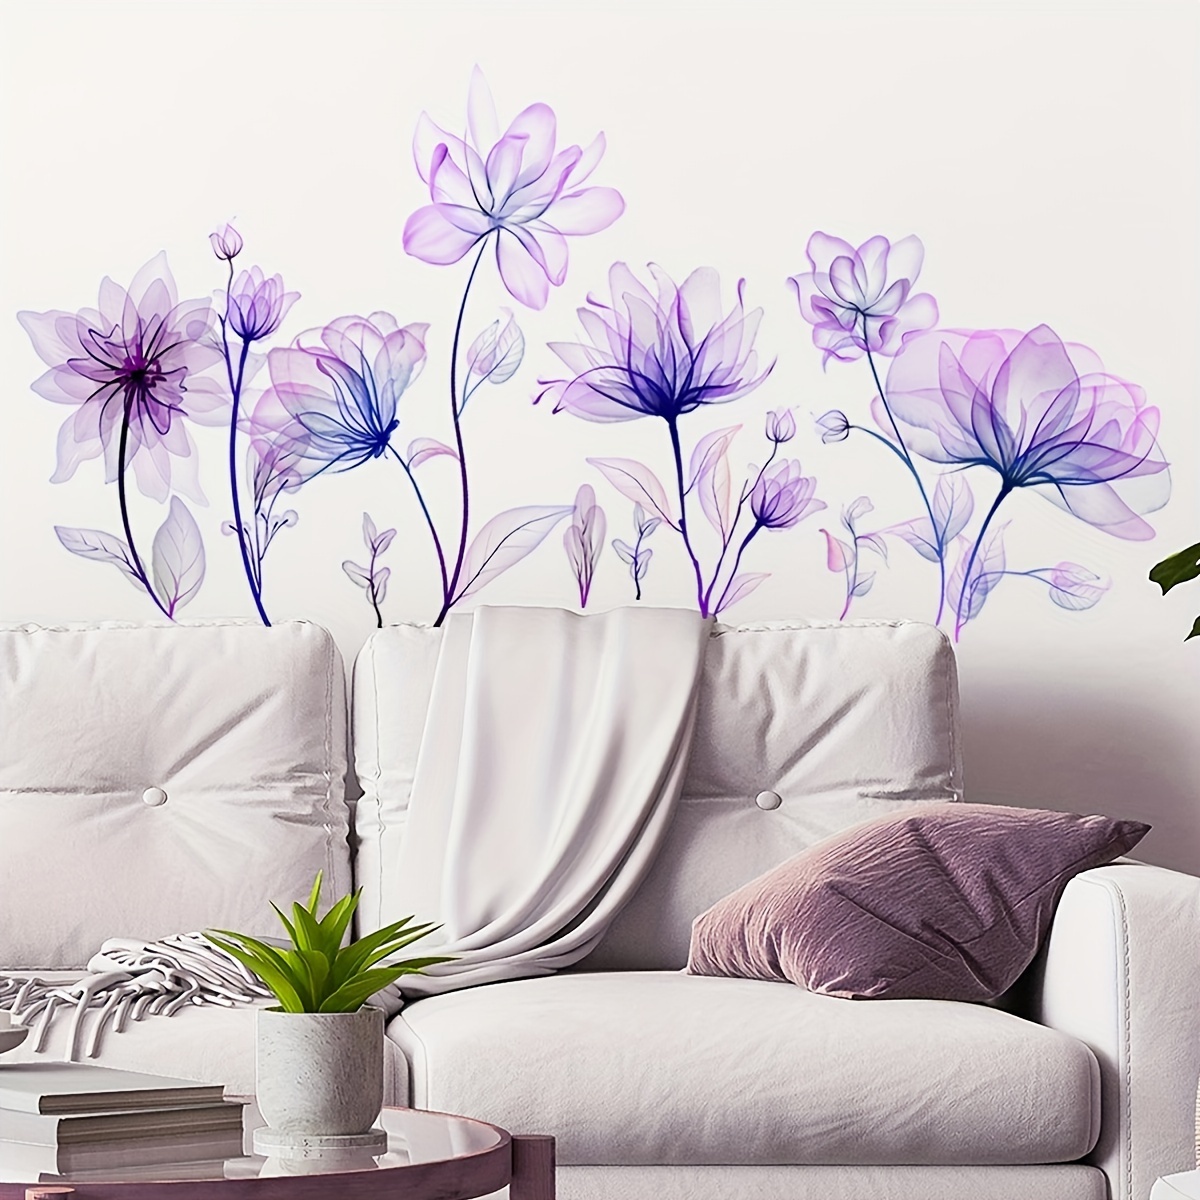 

1pc Creative Wall Sticker, Purple Plant Flower Pattern Self-adhesive Wall Sticker, Bedroom Entryway Living Room Porch Home Decoration Wall Sticker, Removable Sticker, Wall Decor Decal